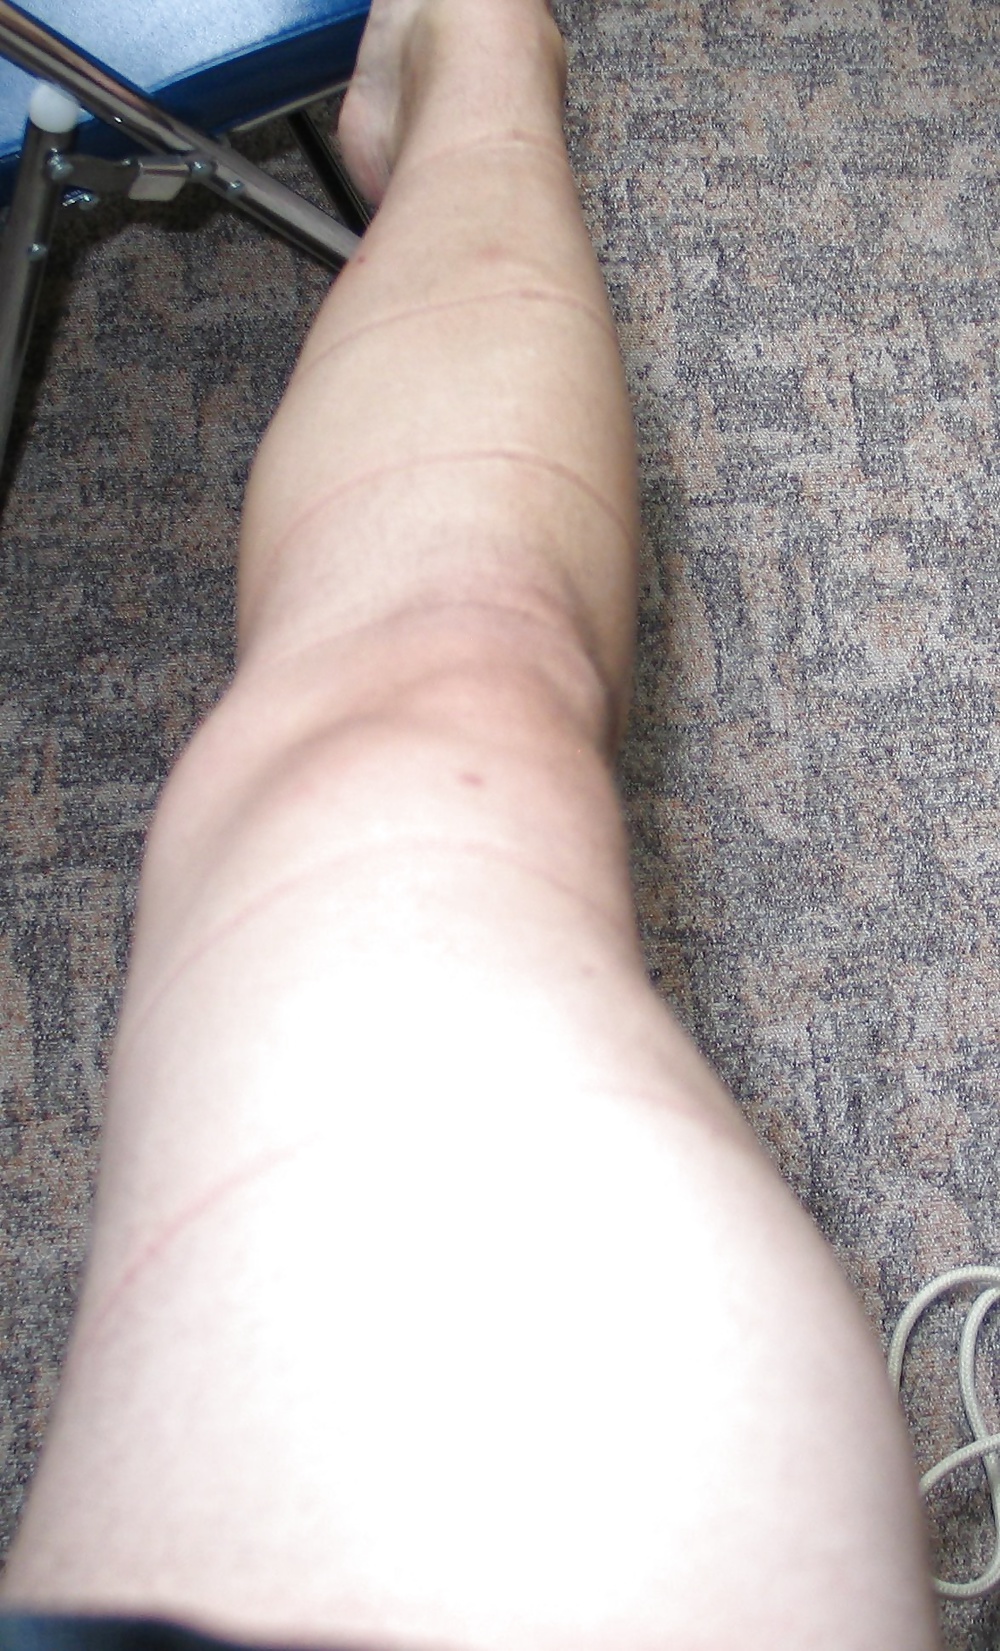 My Legs with Nylon and without Nylon, bound and not bound. #33358022